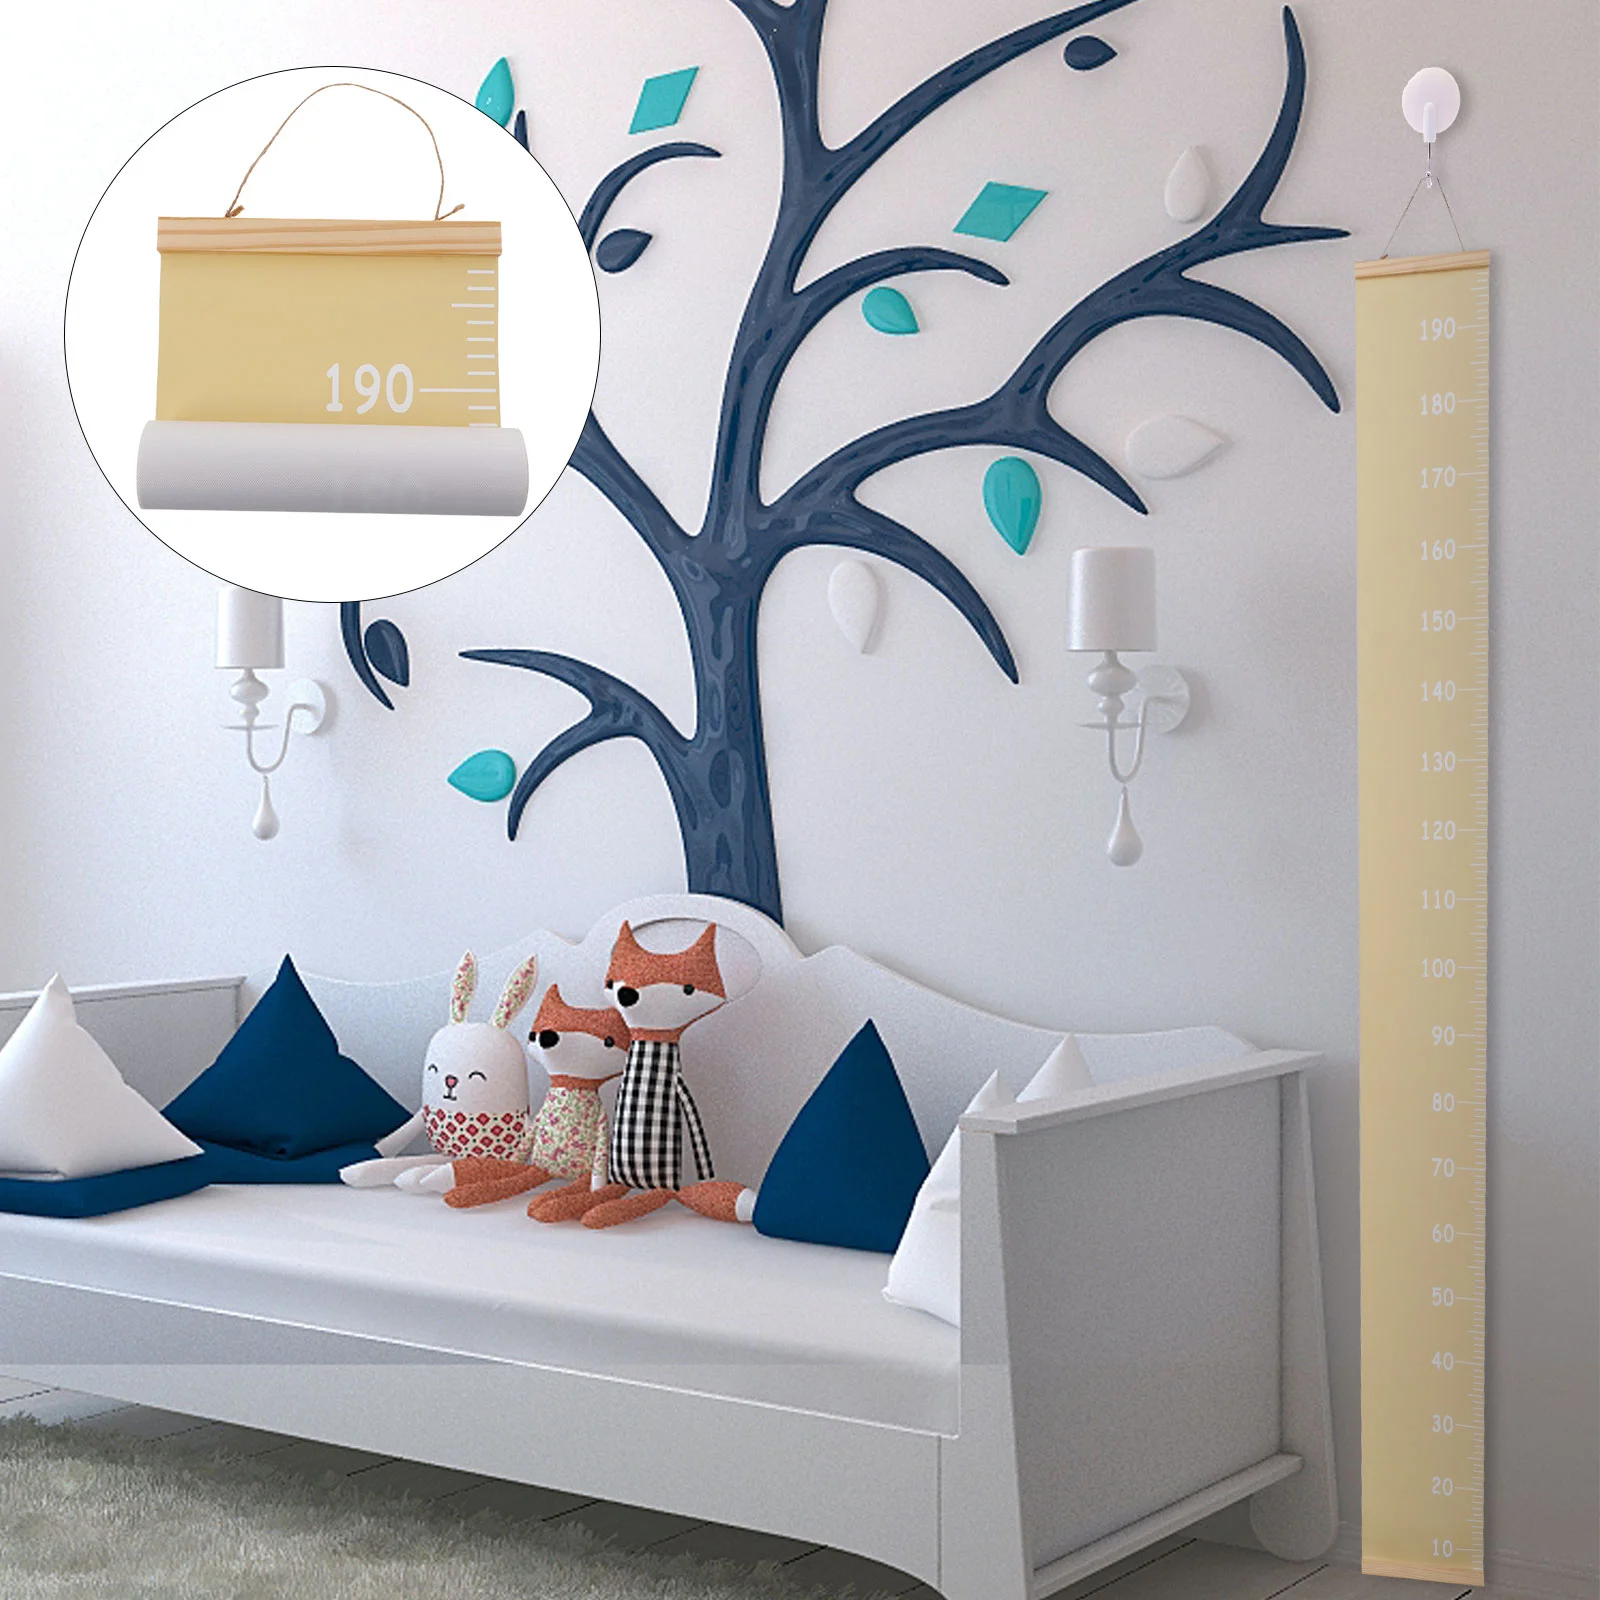 

Children's Height Ruler Kids Removable Measuring Rulers Wall Hanging Measurement Home Growth Chart Pendant Tool Room Decor